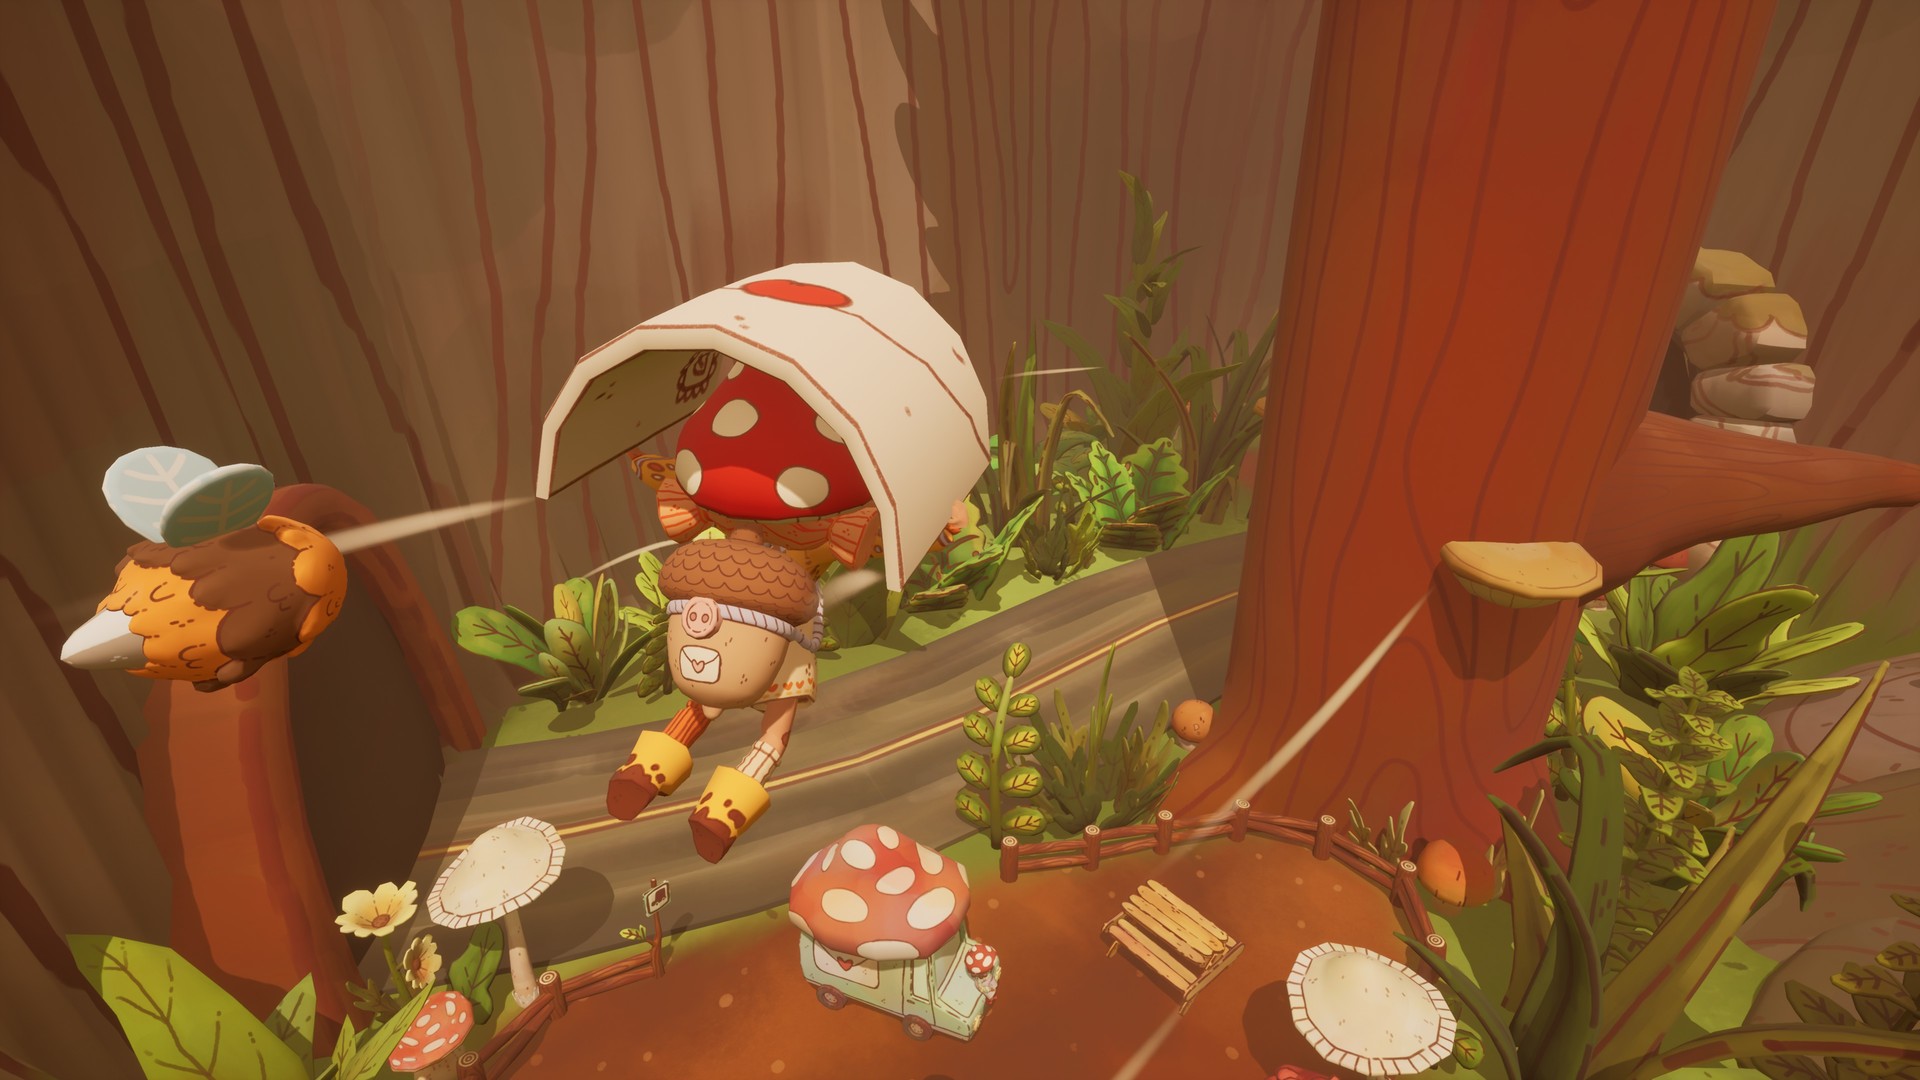  Be a mushroom postal worker delivering to woodland animals in this cozy platformer 